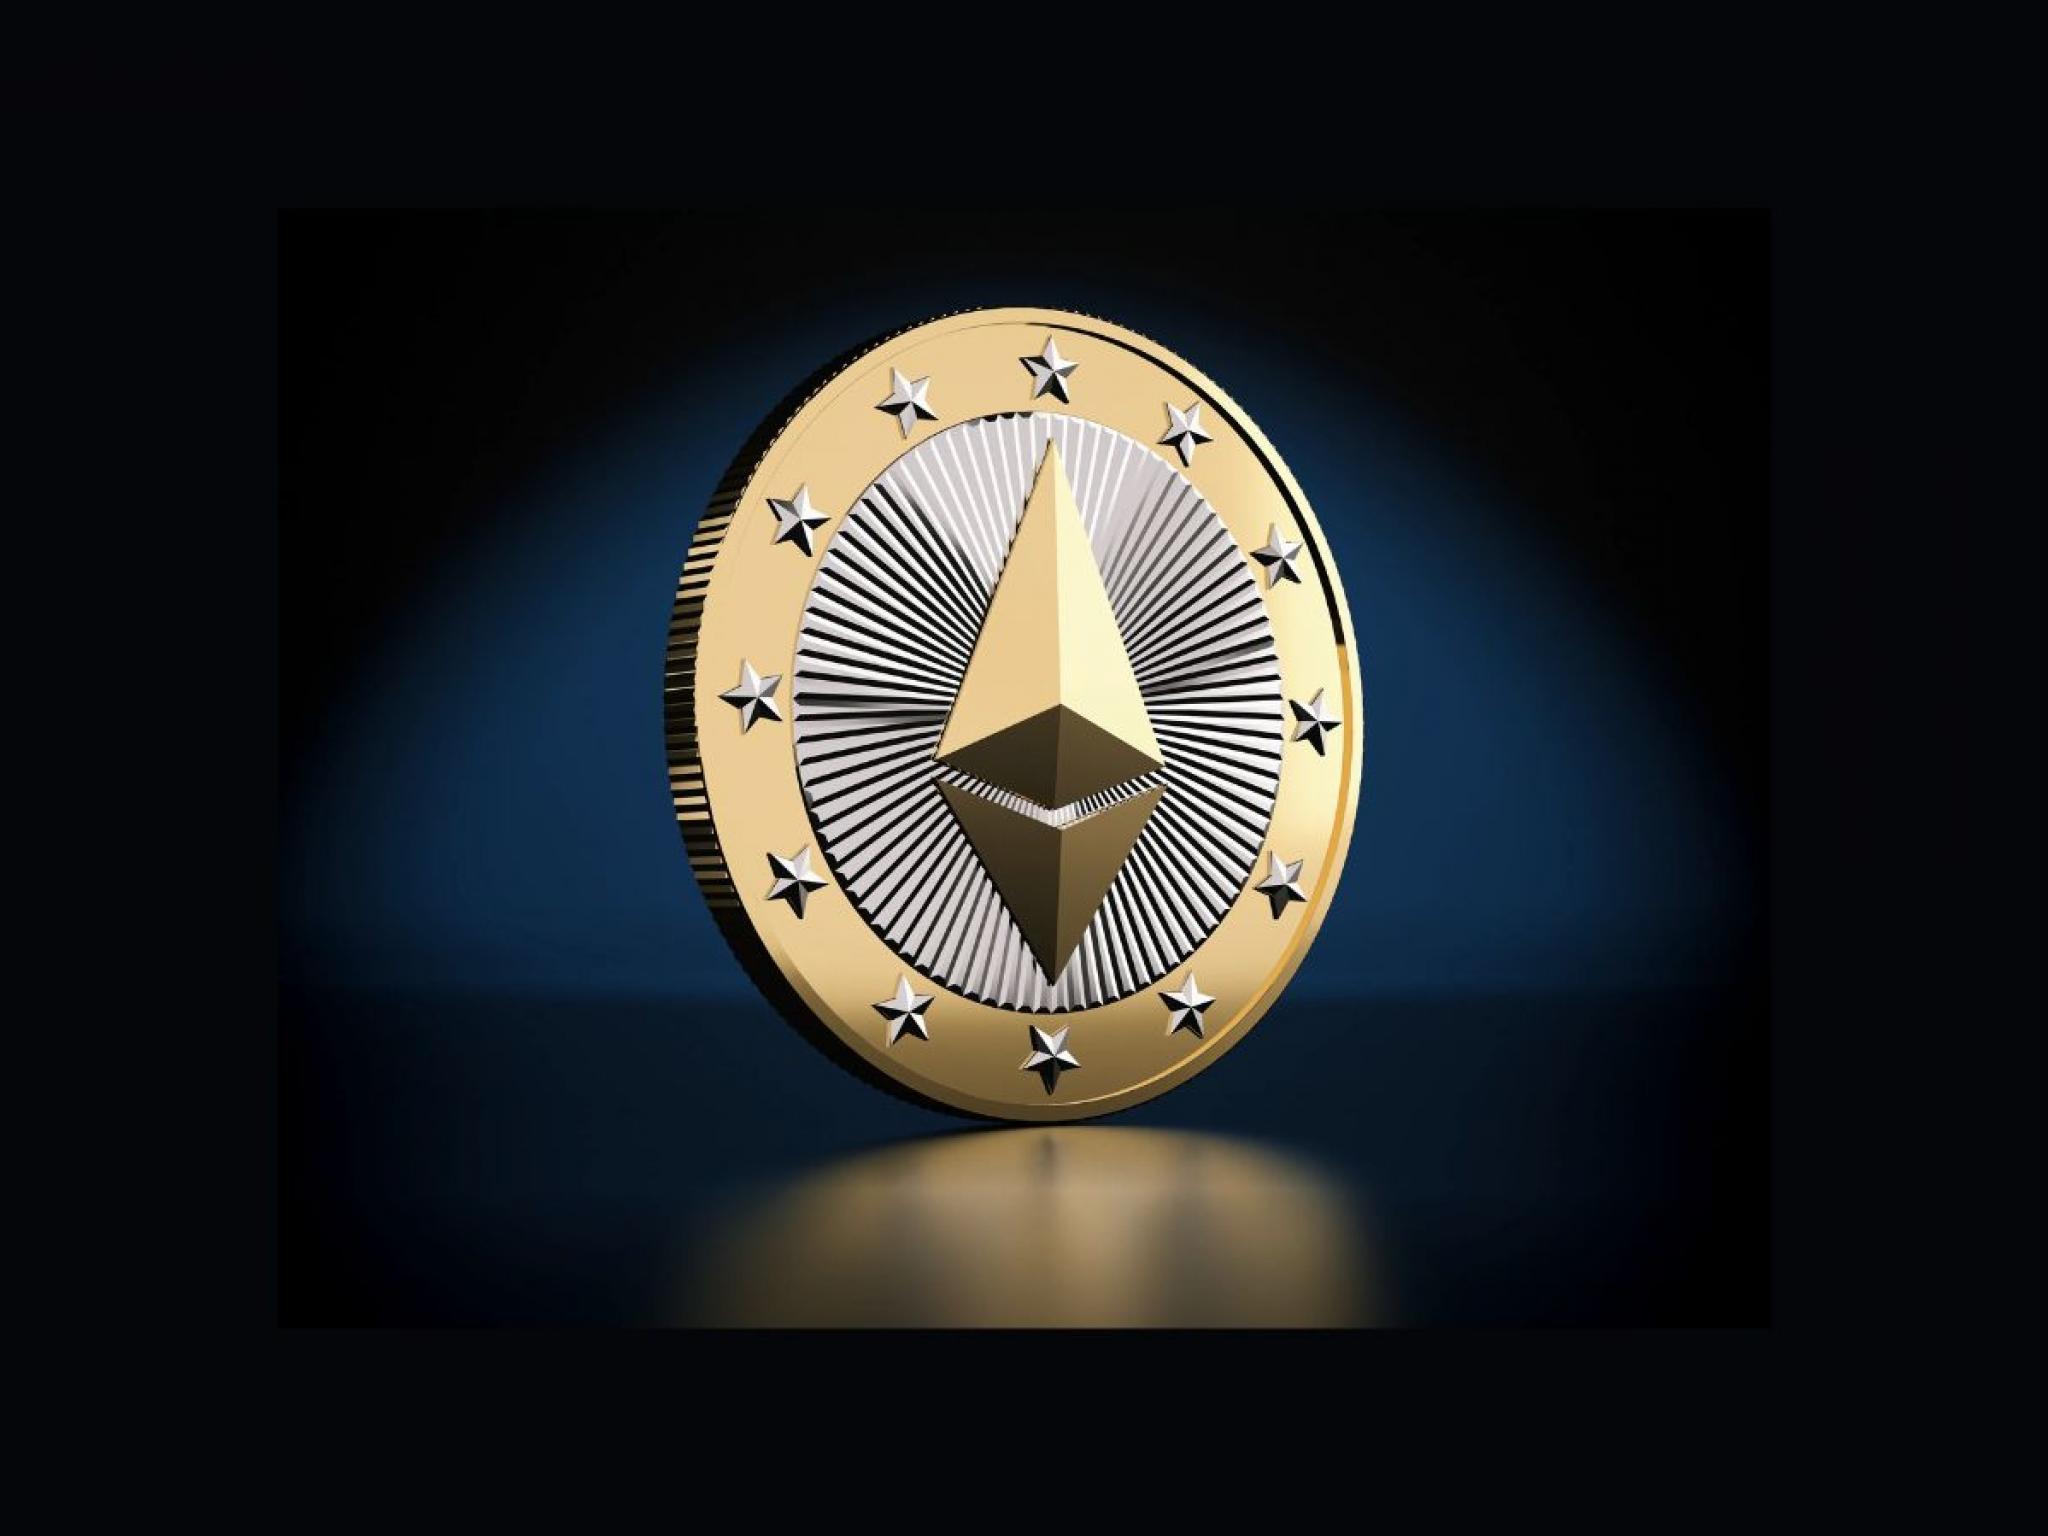  ethereum-surpasses-1900-following-jobless-claims-data-huobi-token-emerges-as-top-gainer 